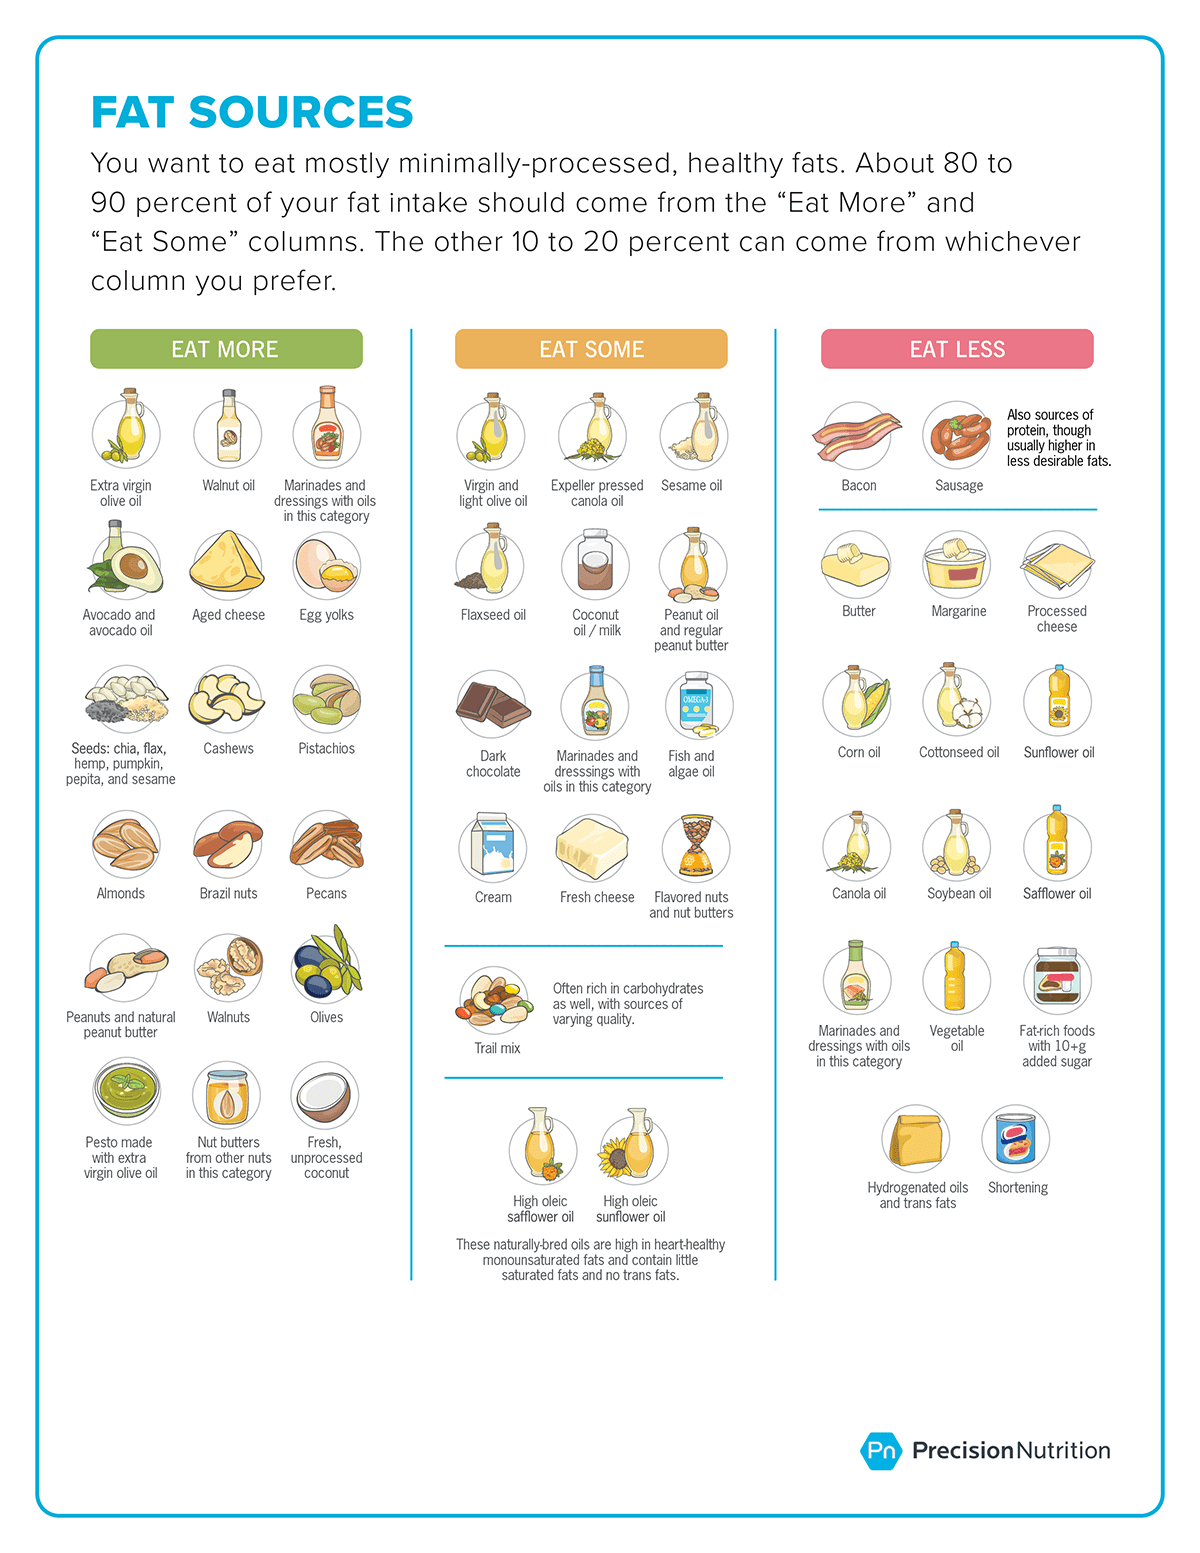 This sports nutrition food list provides the best fats for athletes. It categorizes fats into “Eat More,” “Eat Some,” and “Eat Less.” You want to eat mostly minimally-processed, healthy fats. Aim for a mix of whole-food fats (like nuts and seeds), blended whold foods (like nut butters), and pressed oils (like olive and avocado). Your goal: Most of your fat intake—about 80 to 90 percent—should come from the “Eat More” and “Eat Some” columns. The other 10 to 20 percent can come from whichever column you prefer. The “Eat More” fat-rich food list includes: extra virgin olive oil, walnut oil, marinades and dressings with oils in this category, avocado and avocado oil, aged cheese, egg yolks, seeds (chia, flax, hemp, pumpkin, pepita, and sesame), cashews, pistachios, almonds, Brazil nuts, pecans, peanuts and natural peanut butter, walnuts, olives, pesto made with extra virgin olive oil, nut butters from other nuts in this category, fresh, unprocessed coconut. The “Eat Some” fat-rich food list includes: virgin and light olive oil, expeller pressed canola oil, sesame oil, flaxseed oil, coconut oil/milk, peanut oil and regular peanut butter, dark chocolate, marinades and dressings with oils in this category, fish and algae oil, cream, fresh cheese, flavored nuts and nut butters, trail mix (often rich in carbohydrates as well, with sources of varying quality), high oleic safflower oil, high oleic sunflower oil (these last two naturally-bred oils are high in heart-healthy monounsaturated fats and contain little saturated fat and no trans fat). The “Eat Less” fat-rich food list includes: bacon and sausage (although bacon and sausage are sources of protein, they’re usually higher in undesirable fats), butter, margarine, processed cheese, corn oil, cottonseed oil, sunflower oil, canola oil, soybean oil, safflower oil, marinades and dressings with oils in this category, vegetable oil, fat-rich foods with 10+ grams of added sugar, hydrogenated oils and trans fats, shortening.